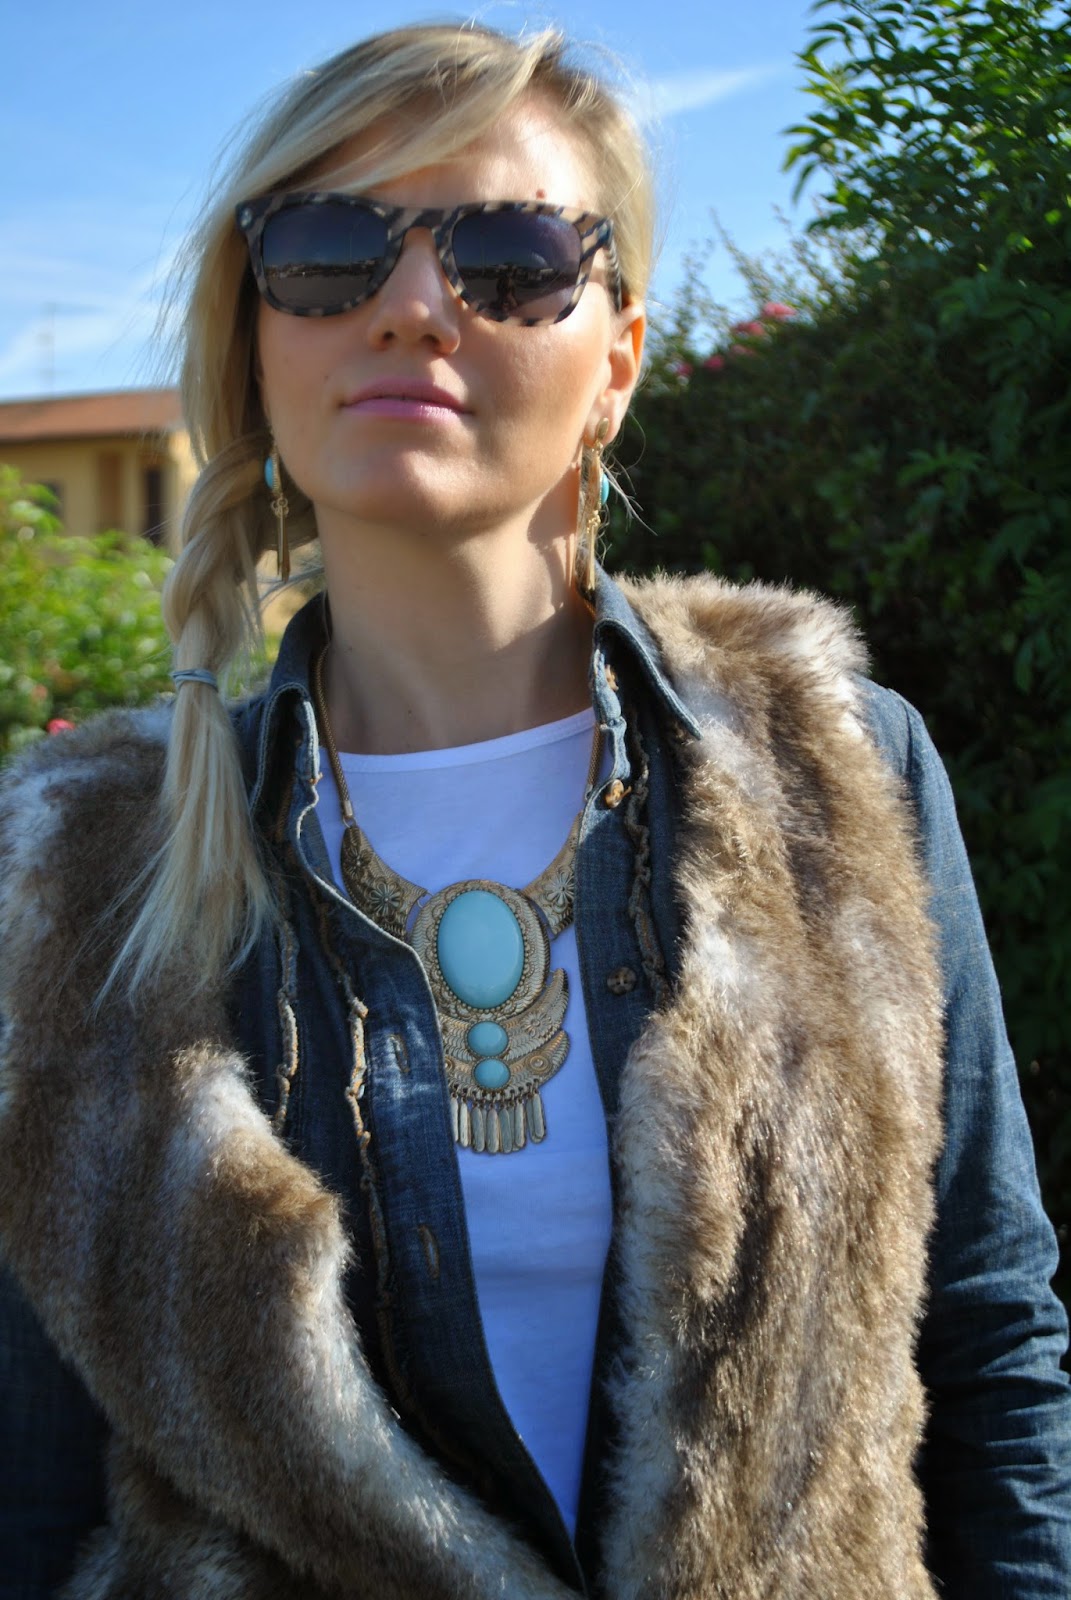 outfit autunnali casual outfit jeans camicia in denim cuissardes e  gilet in ecopelliccia orecchini e collana etnica majique london hoe to wear cuissardes how to wear faux fur vest oautumnal outfit autumnal casual outfit mariafelicia magno mariafelicia magno fashion blogger colorblock by felym fashion blogger italiane fashion bloggers italy italian girl ragazze italiane fashion blogger bionde blonde girls